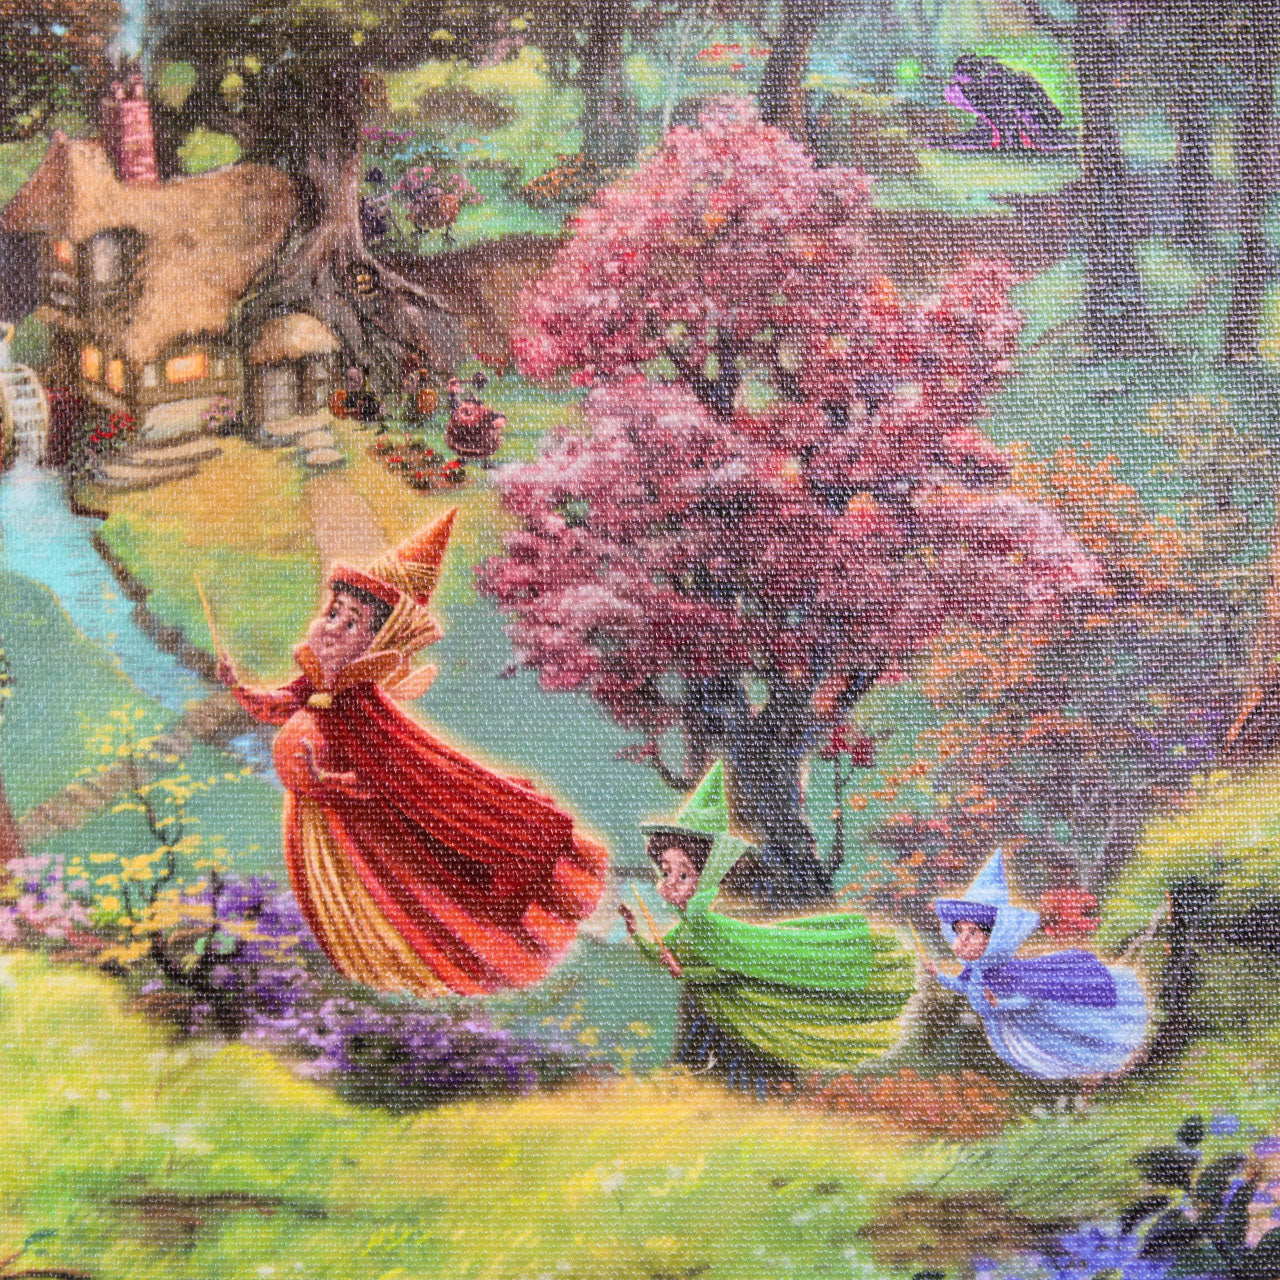 Load image into Gallery viewer, Sleeping Beauty (Disney) Wrapped Canvas Art Print
